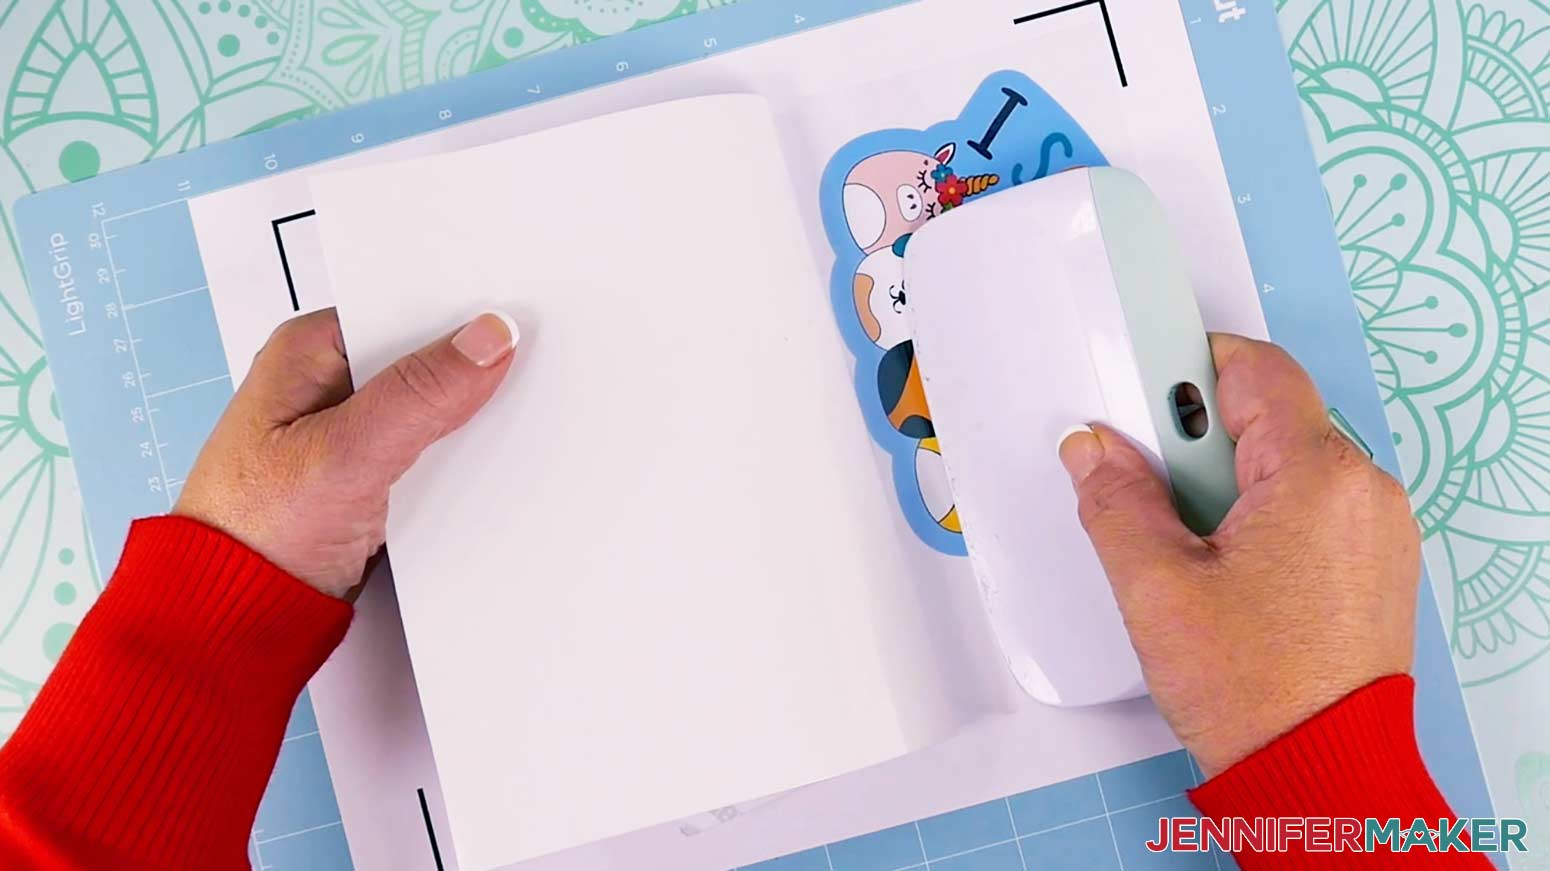 Use a scraper to help apply the clear vinyl to minimize the chance of bubbles.